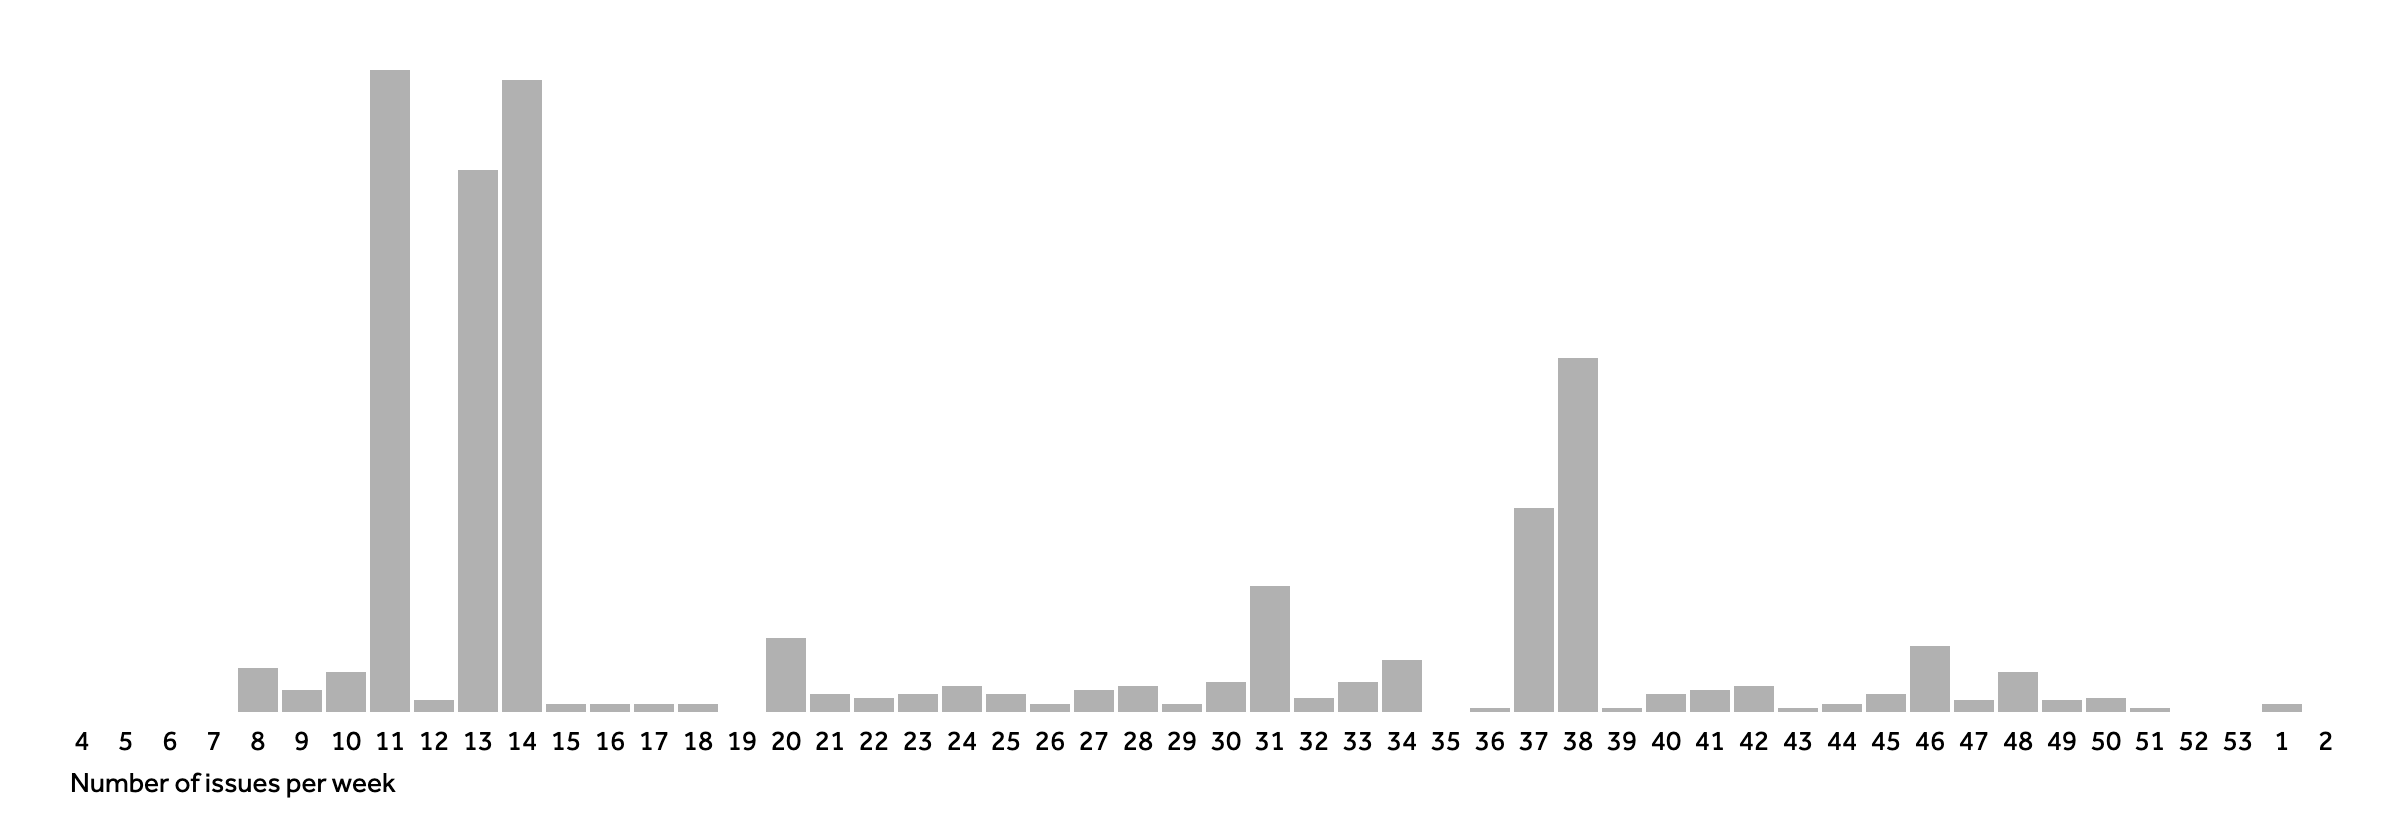 A sample graph from the application